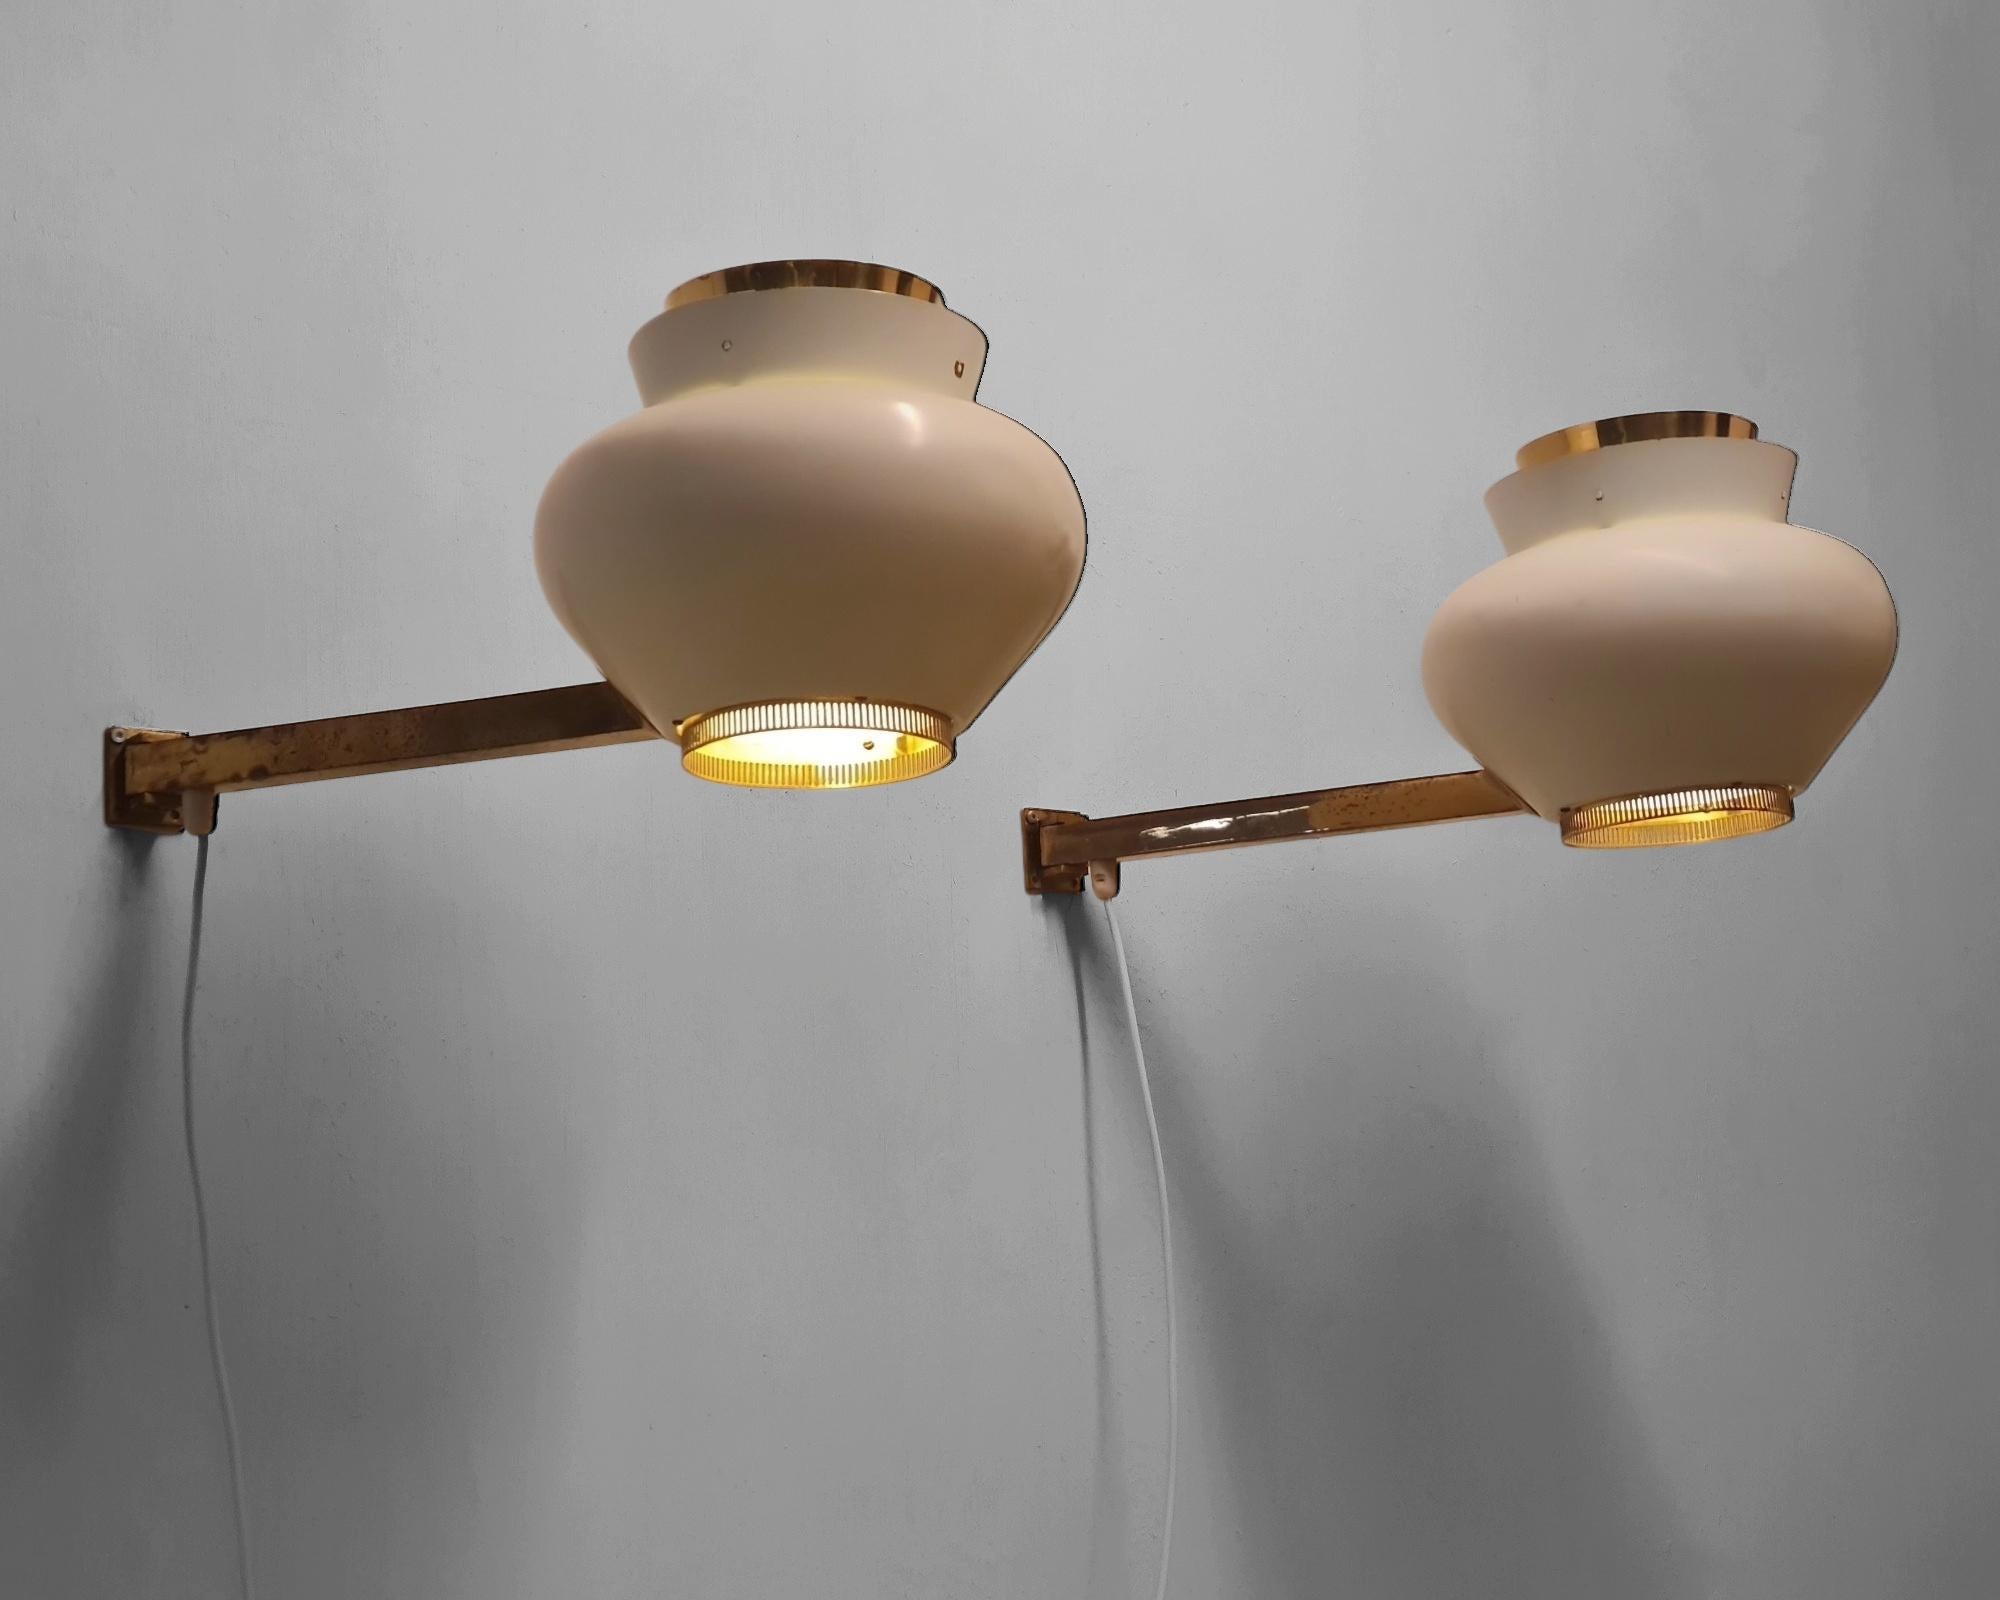 A Pair of Alvar Aalto Commissioned Wall Lamps, Valaistustyö 1950s For Sale 13